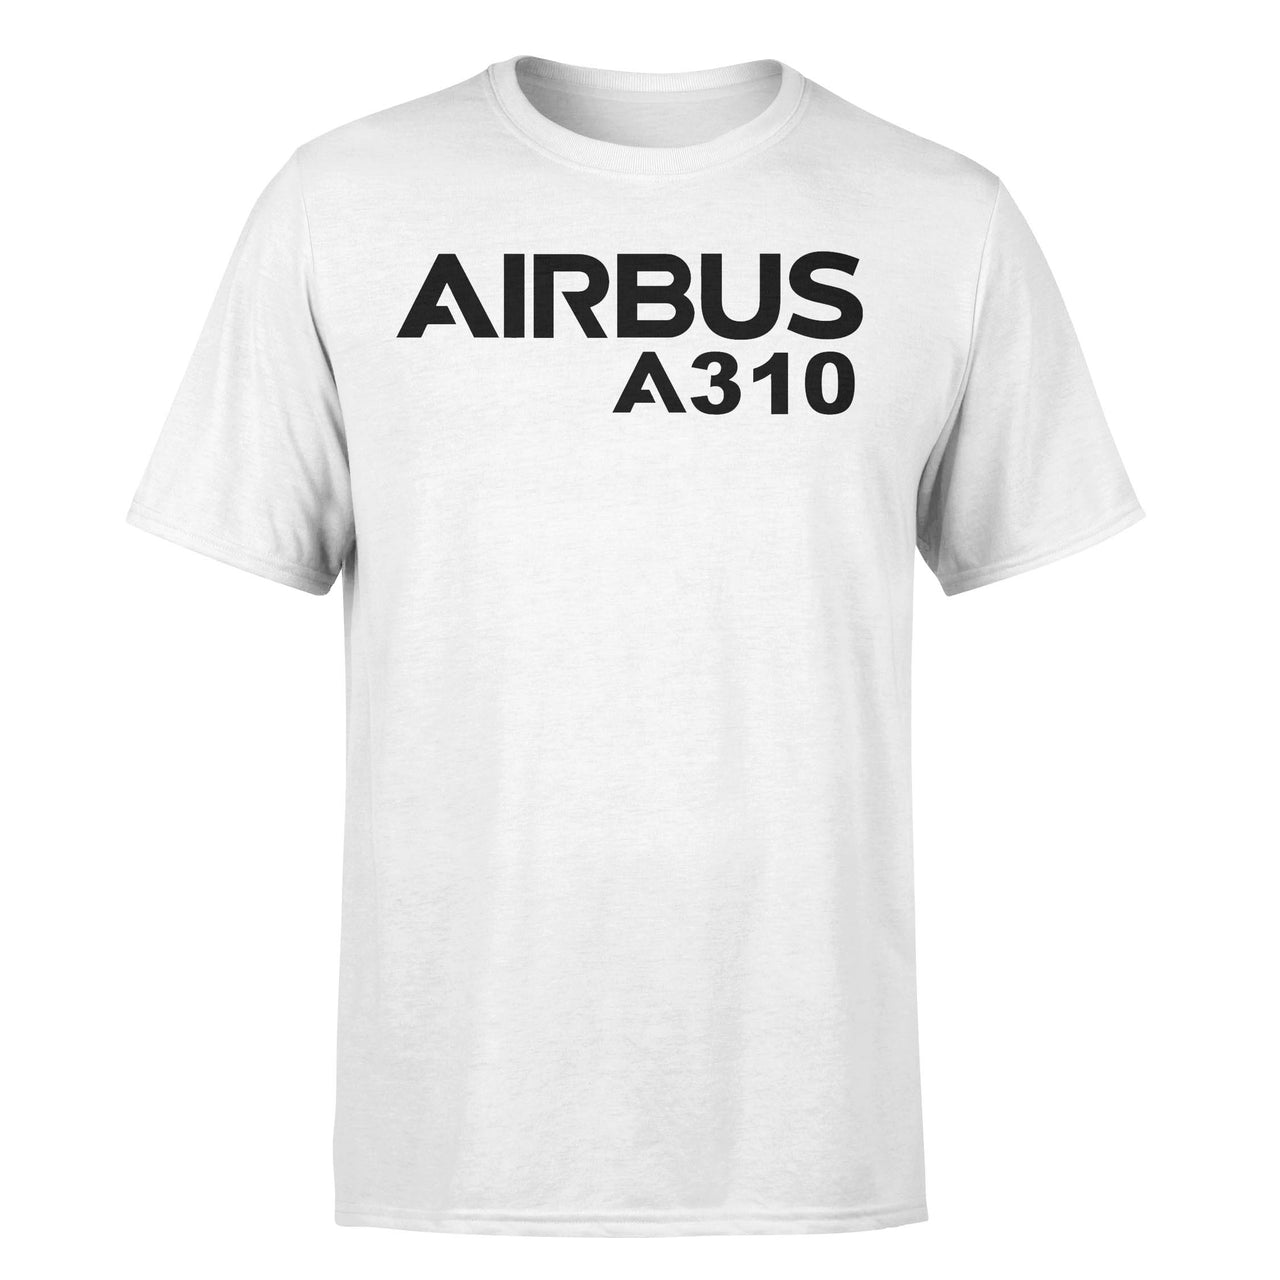 Airbus A310 & Text Designed T-Shirts